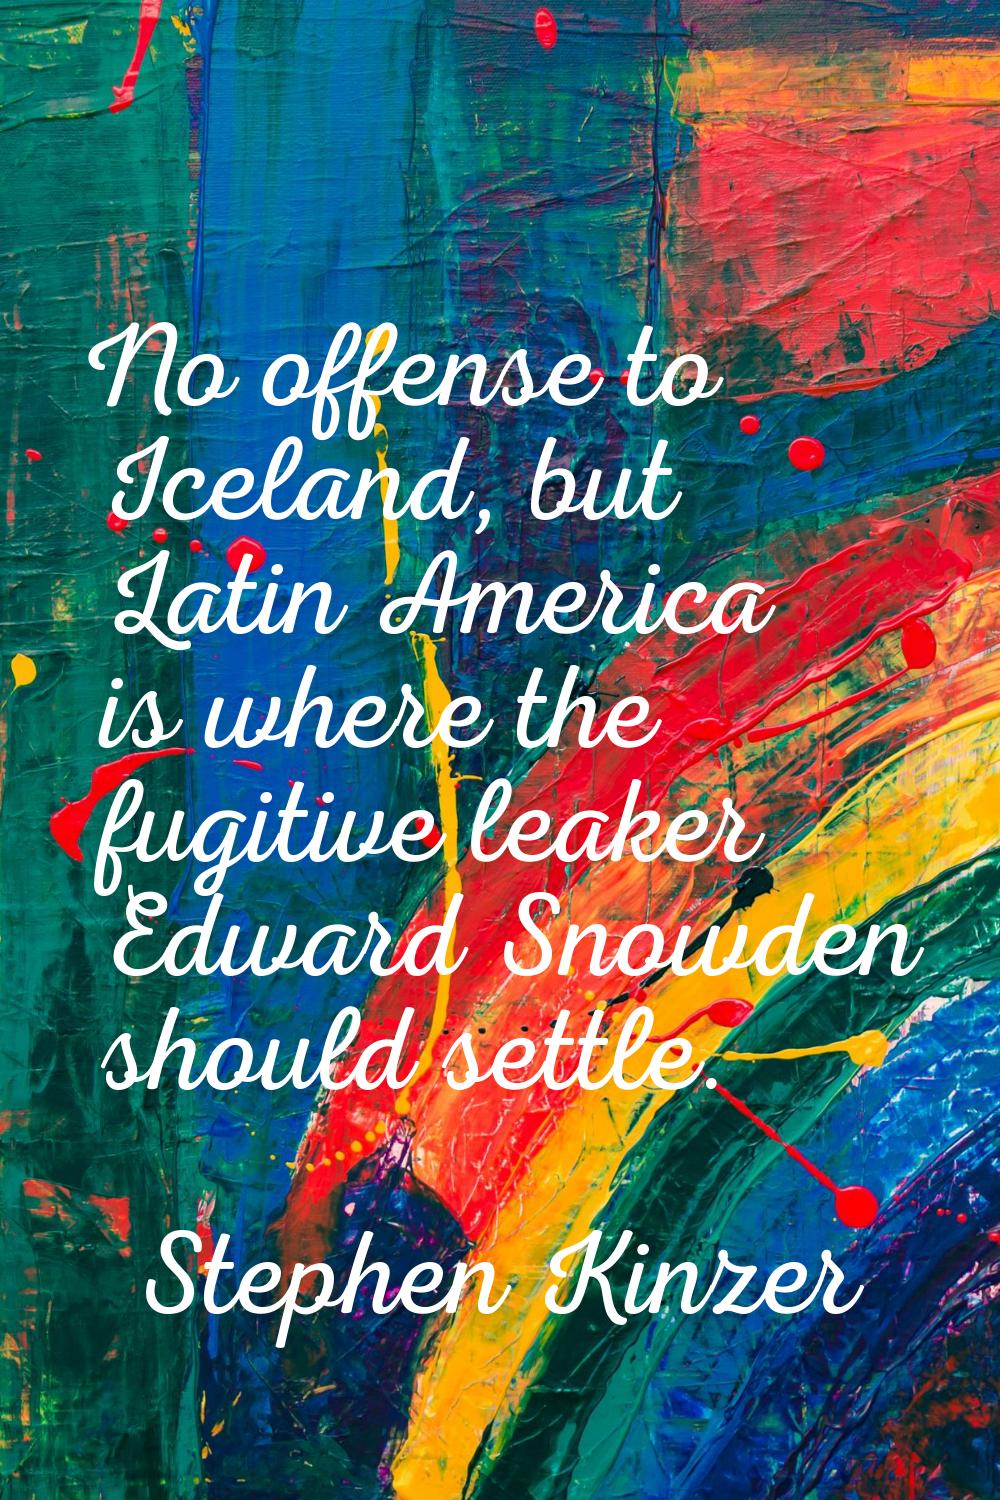 No offense to Iceland, but Latin America is where the fugitive leaker Edward Snowden should settle.